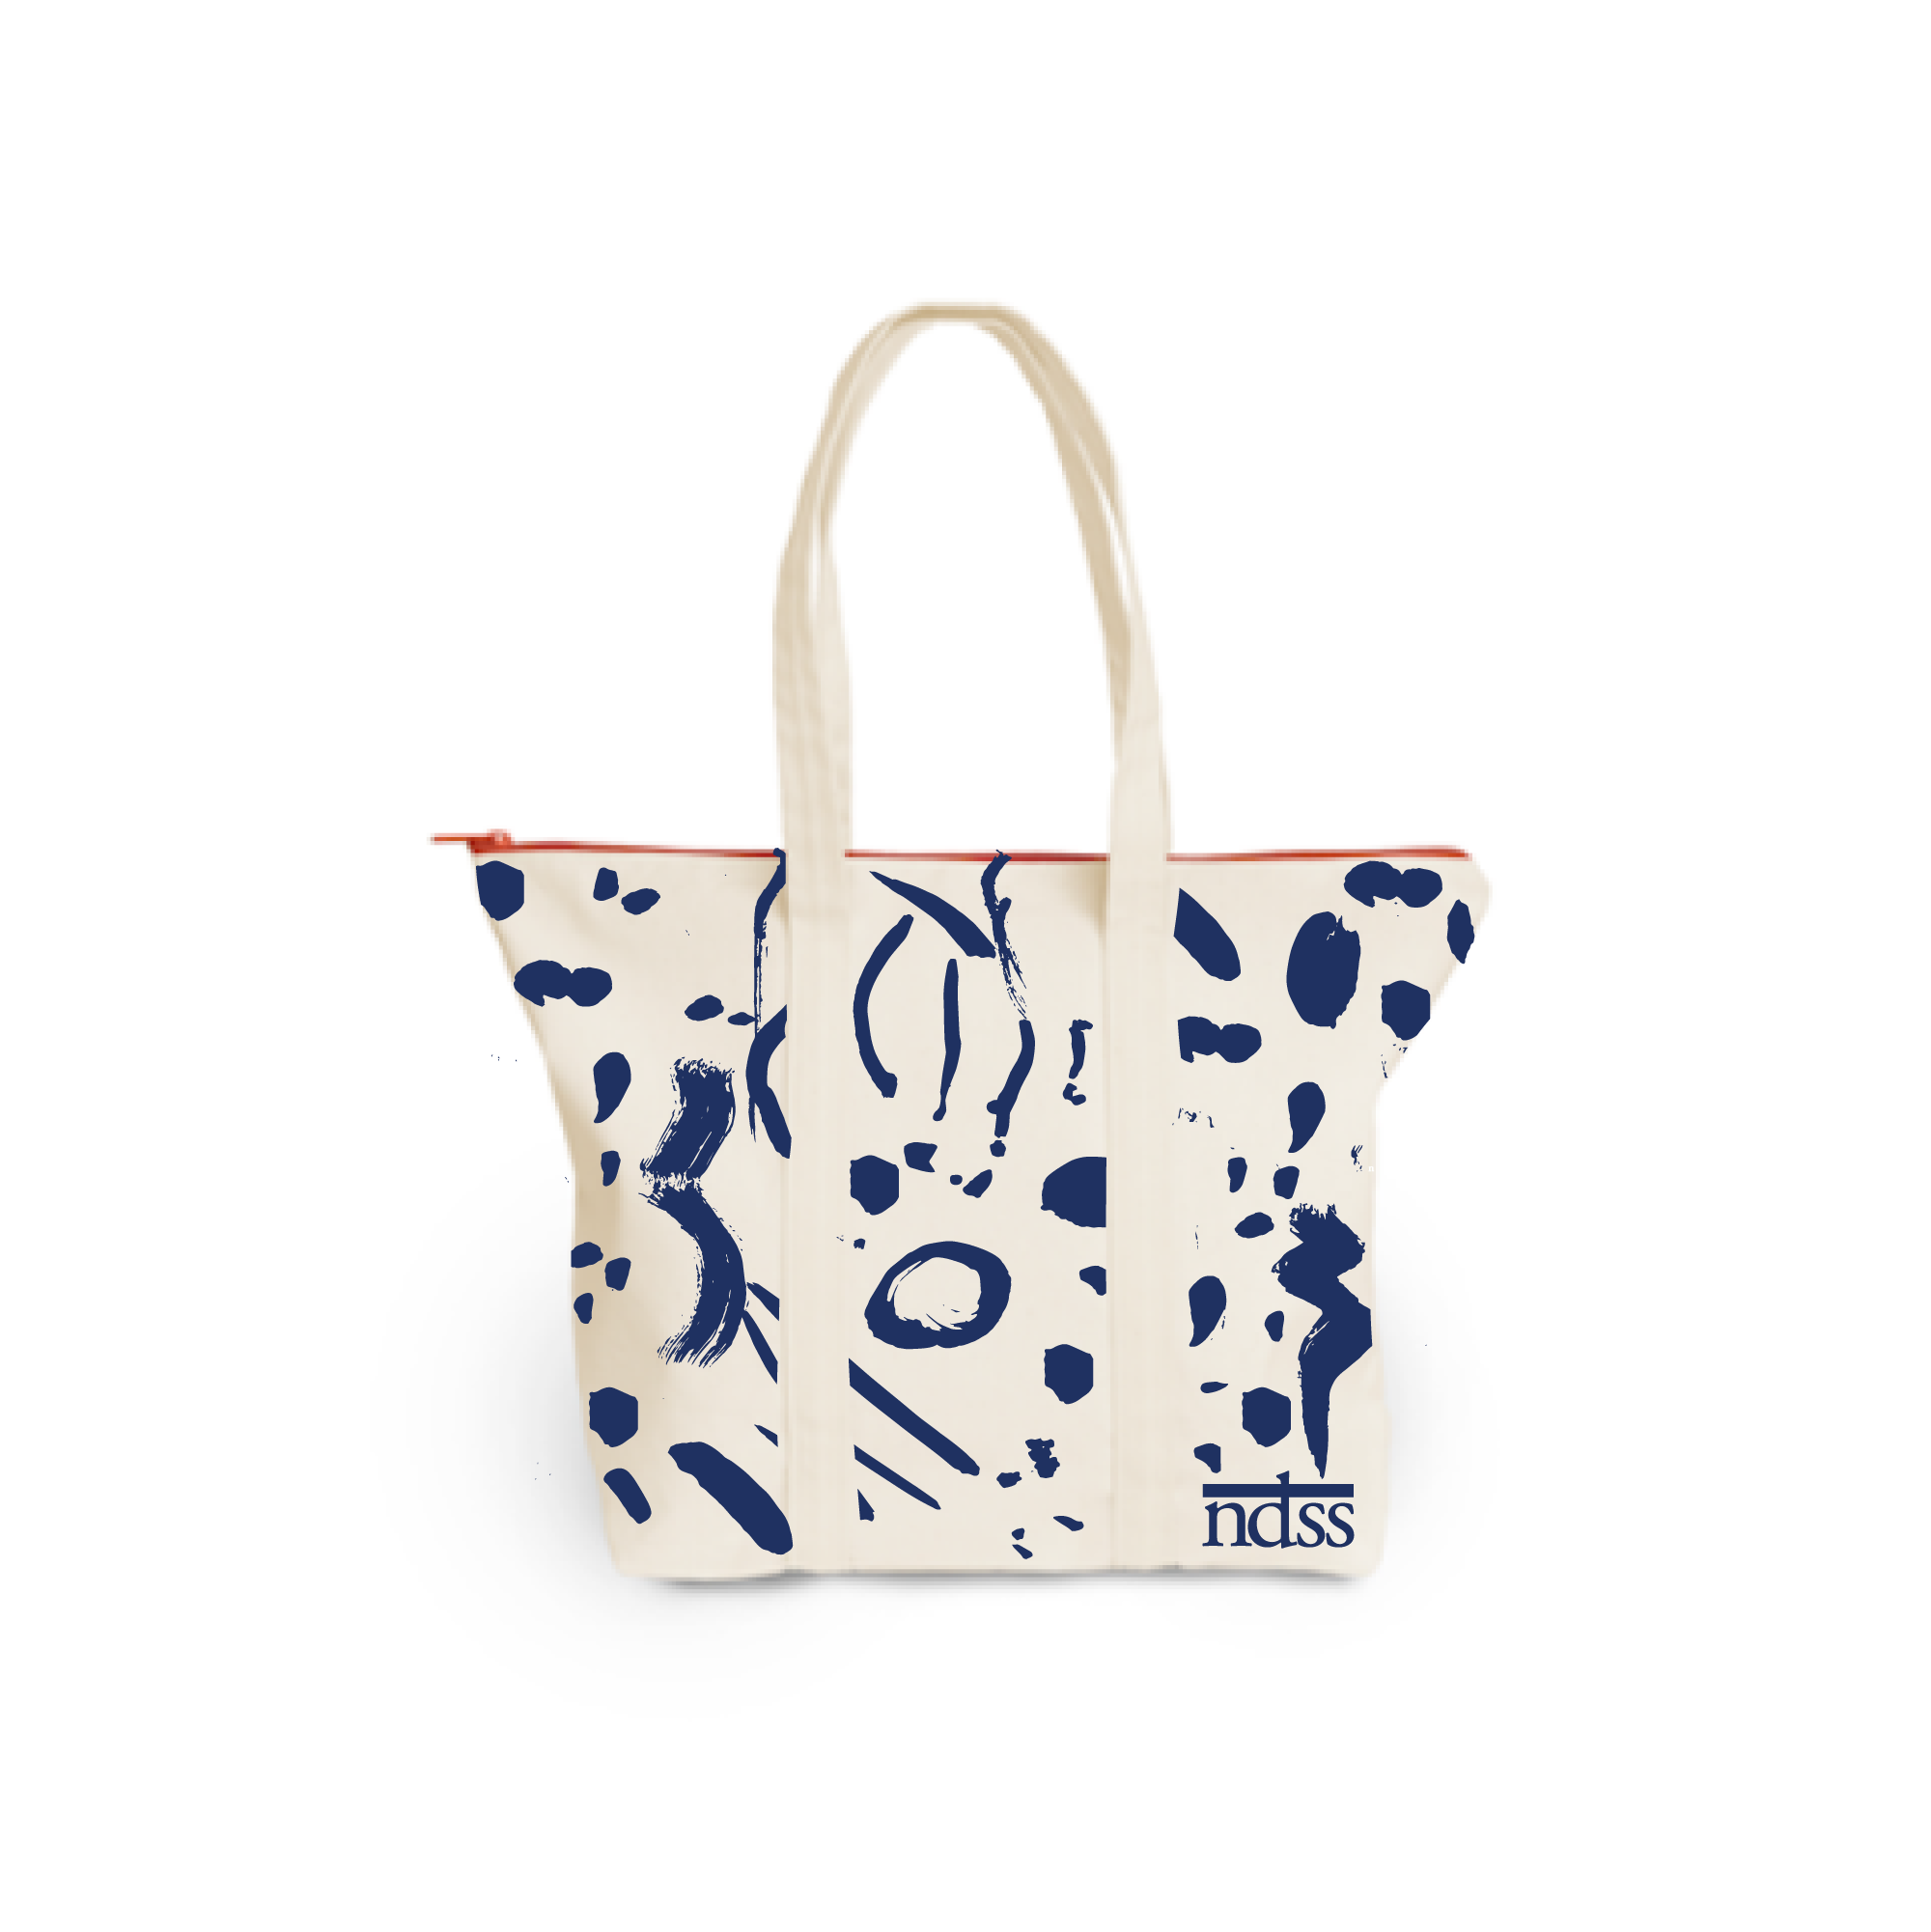 photo of canvas tote bag from Dance Happy Designs featuring the NDSS logo and blue paint splatter